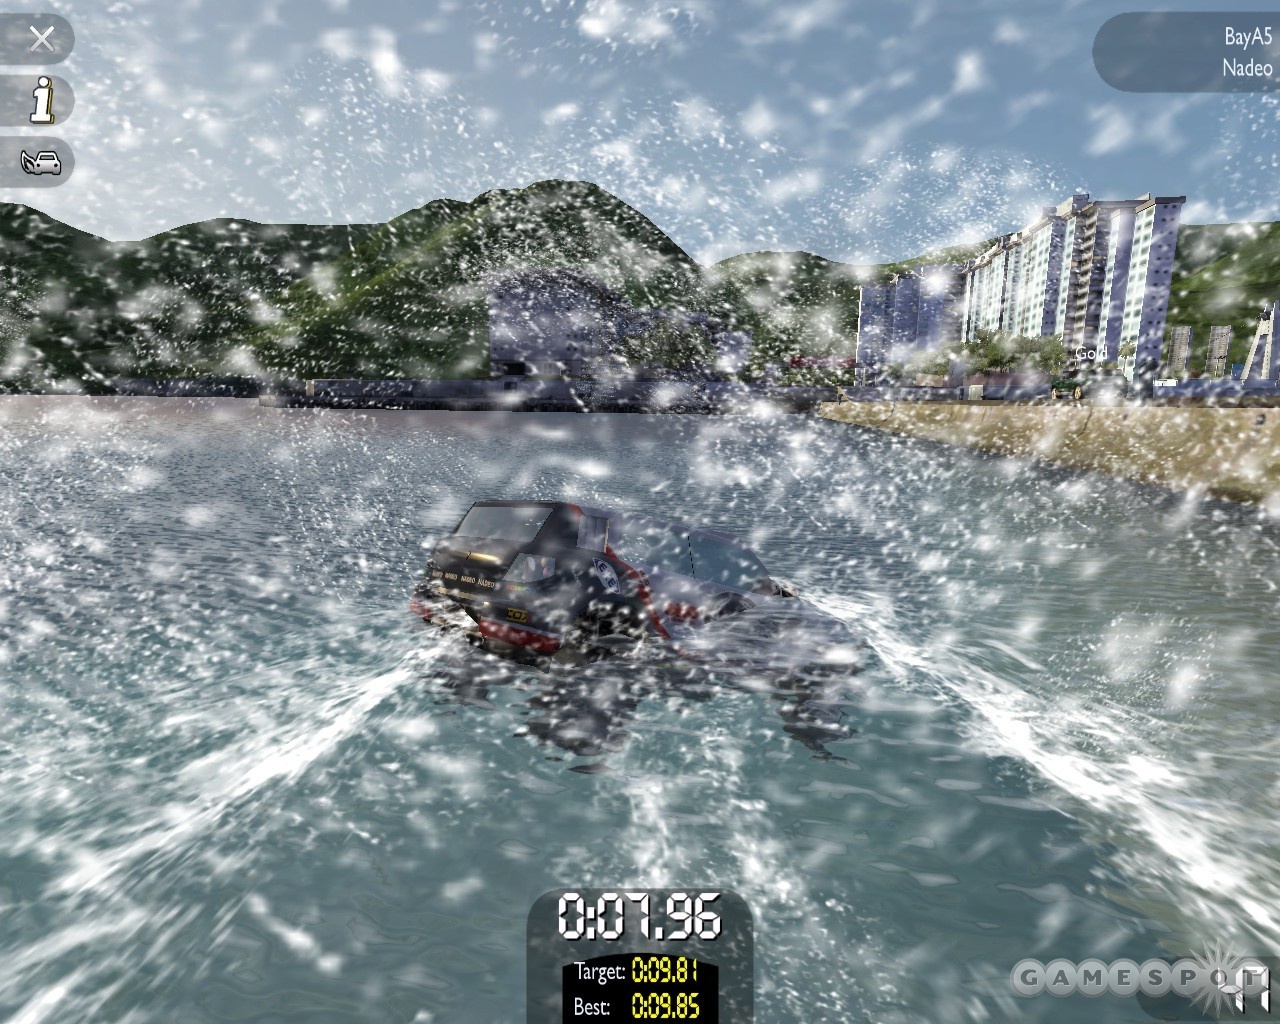 Water hazards are about as common on a TrackMania United track as they are on a golf course.